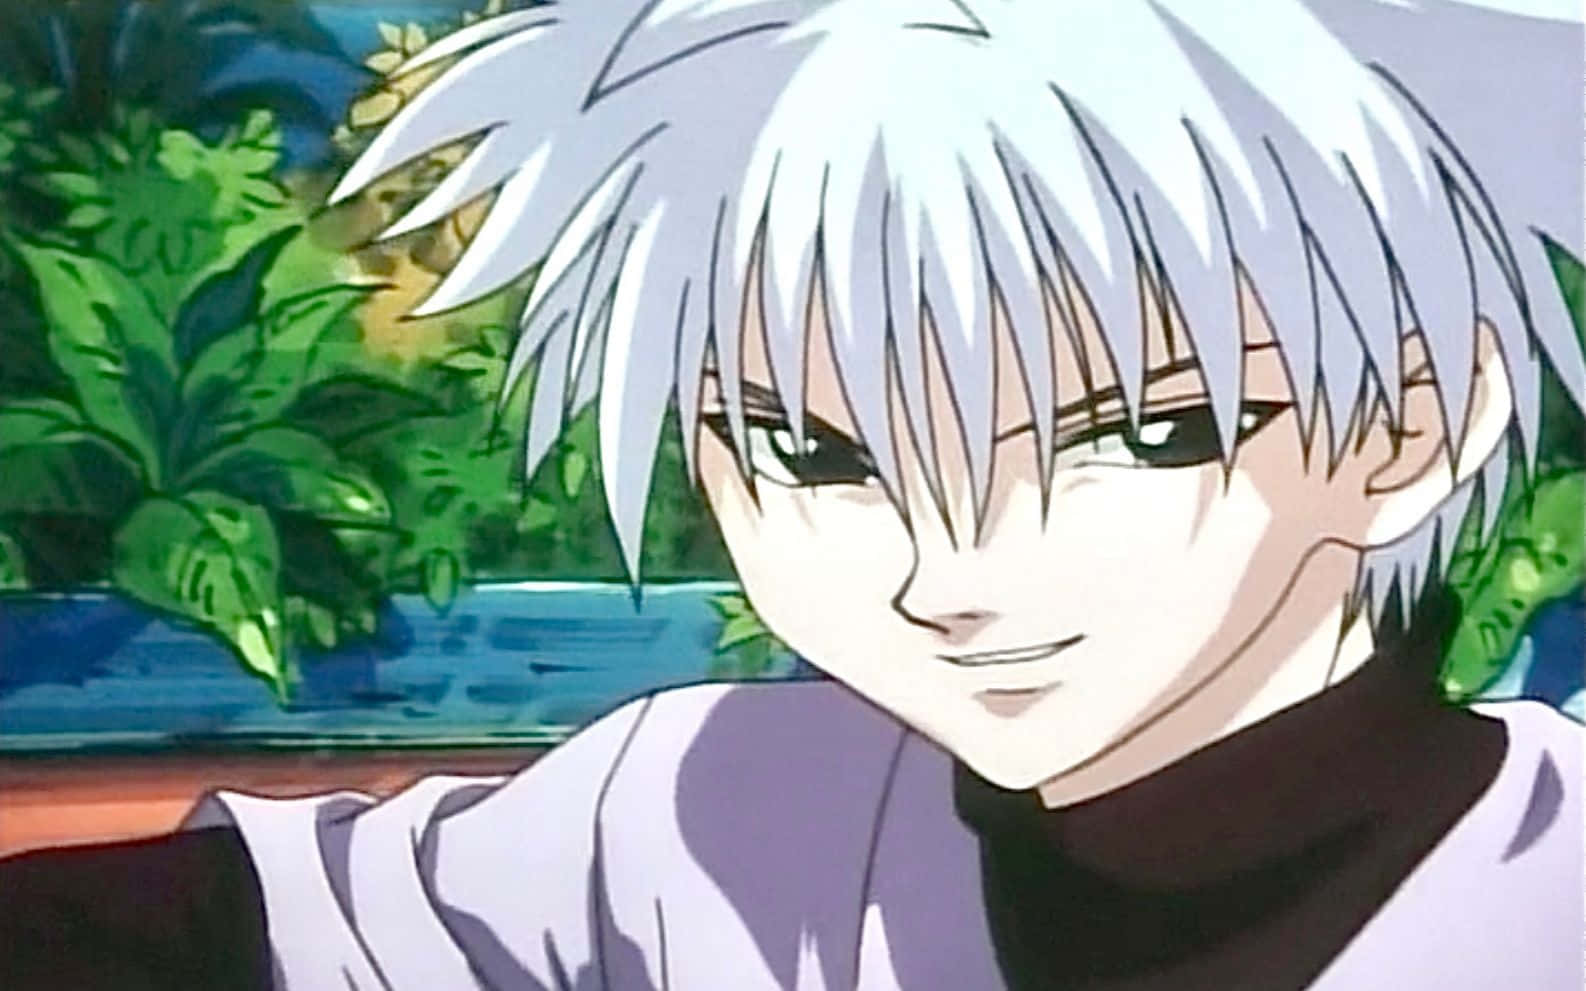 A White Haired Anime Character With A Black Shirt